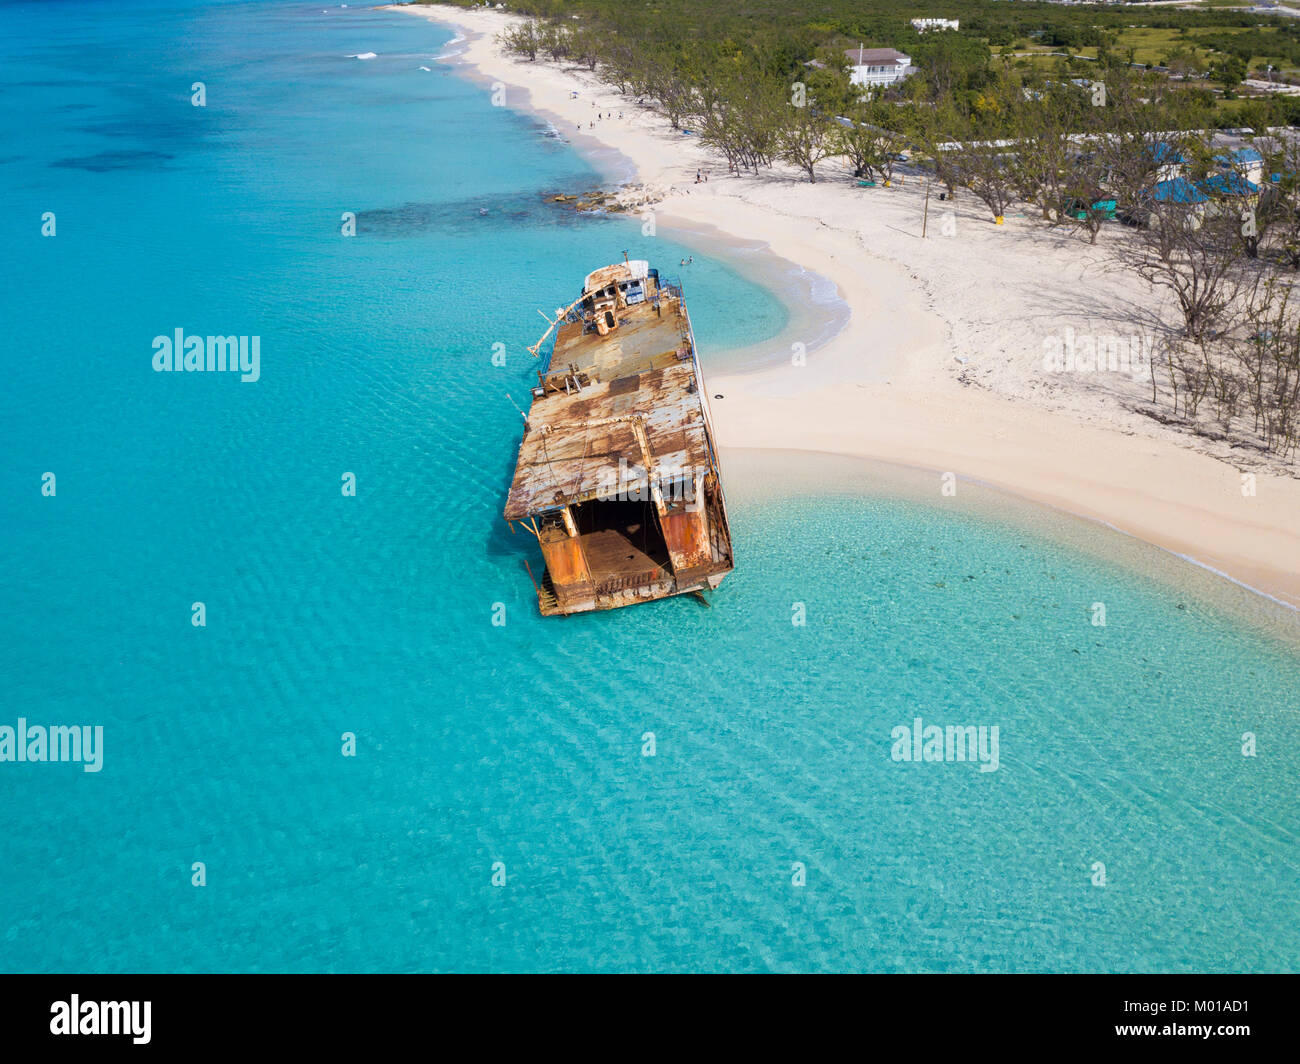 Aerial view of shipwreck on the beach in Grand Turk, Turks and Caicos. Stock Photo